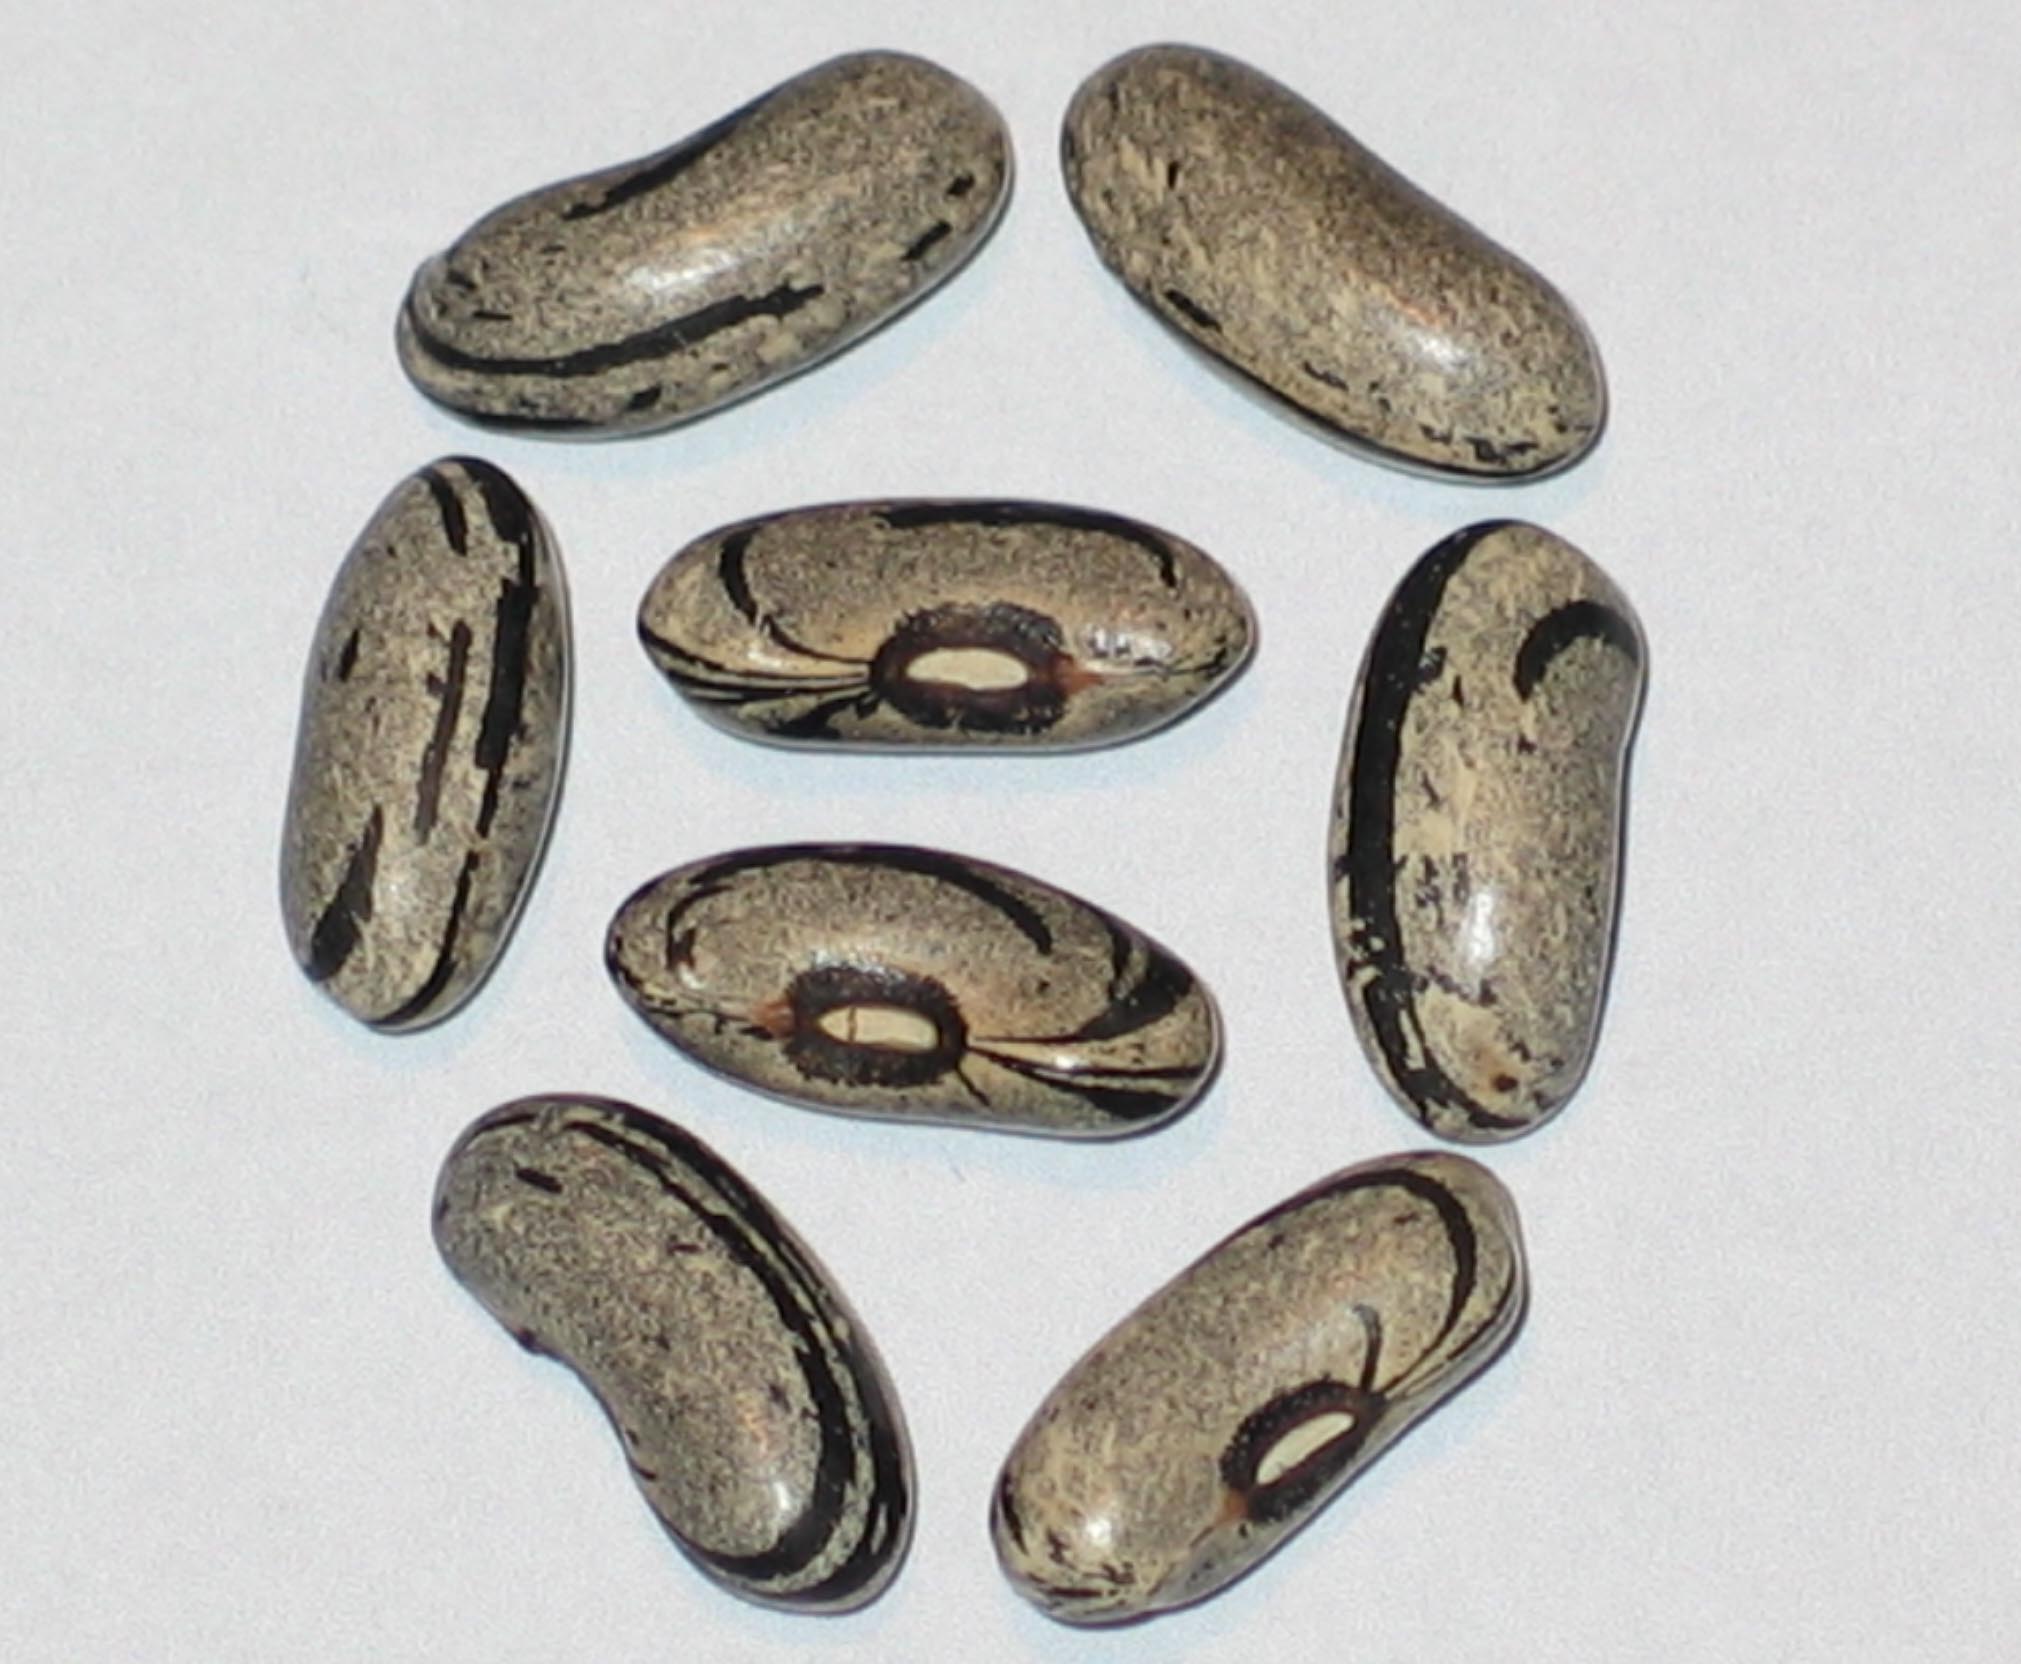 image of Tennessee Wonder beans